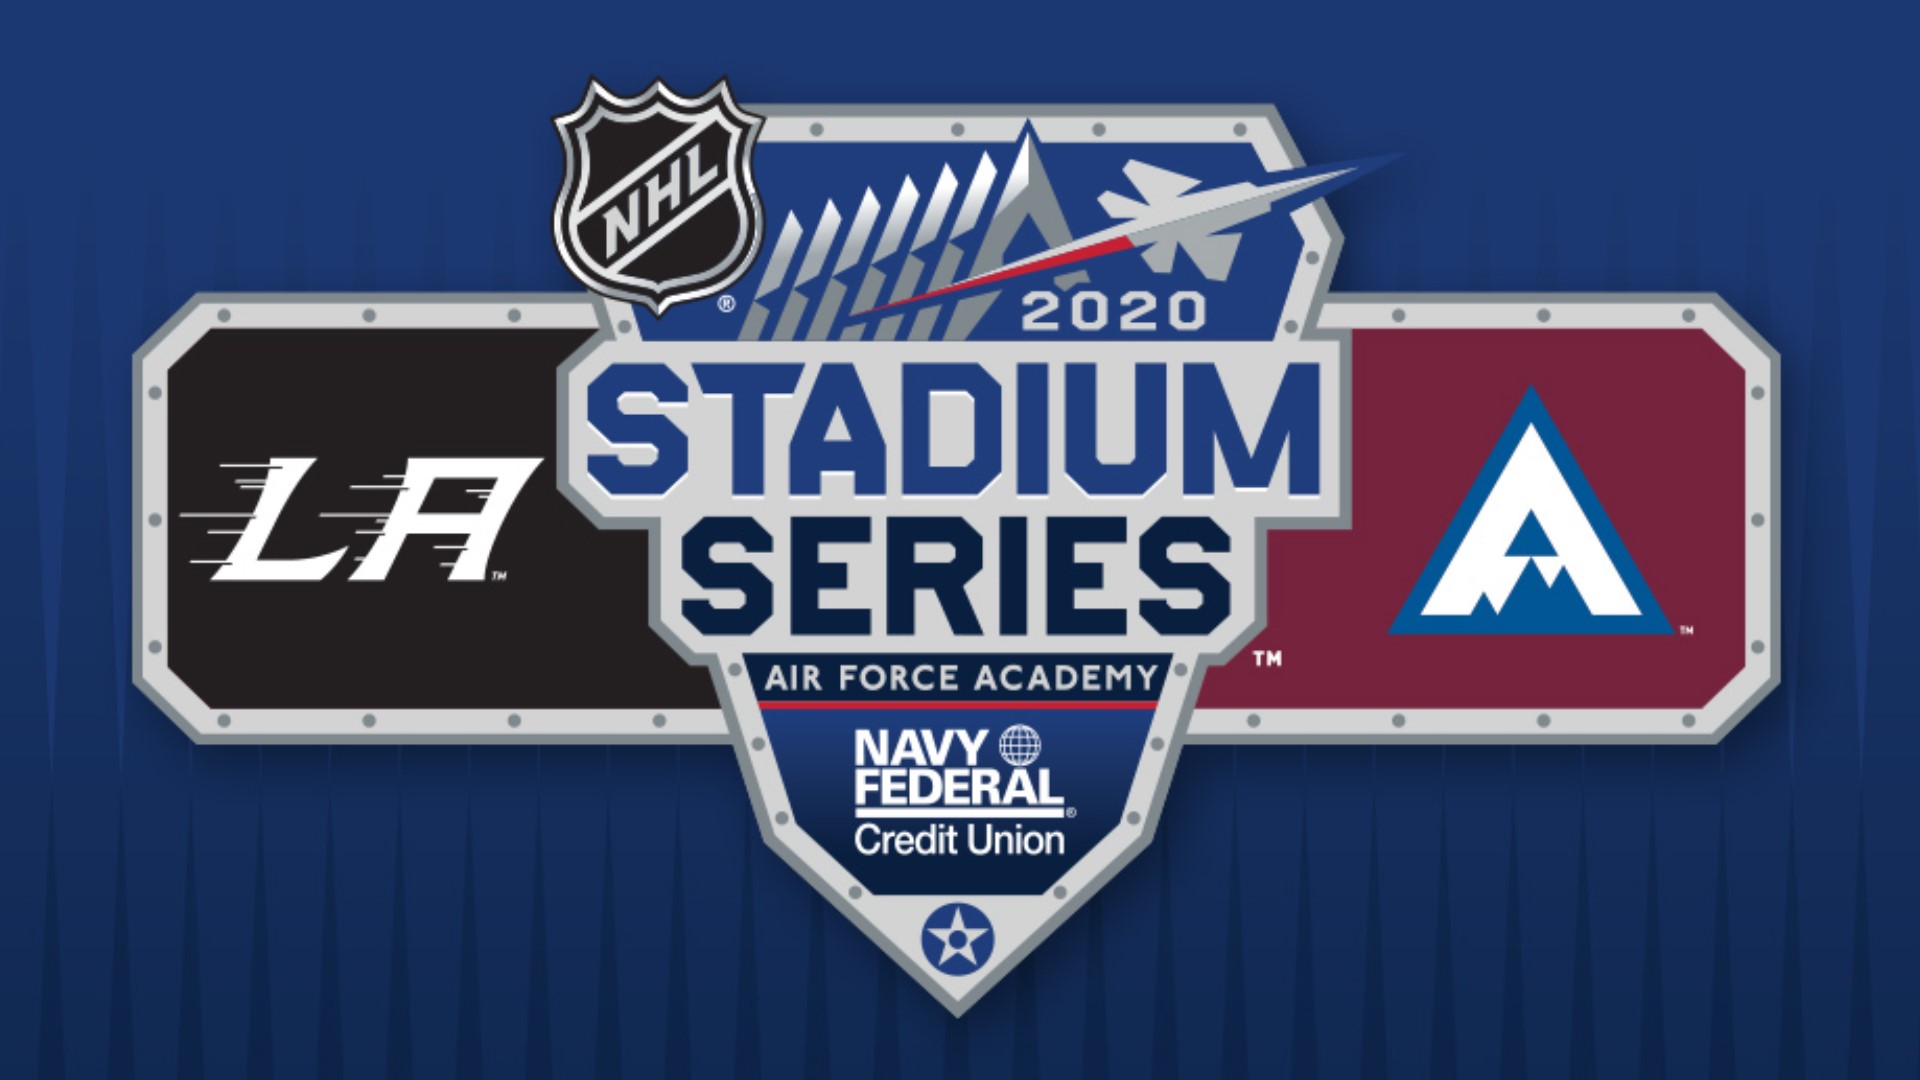 They play the LA Kings on Saturday, Feb. 15 at the U.S. Air Force Academy in Colorado Springs.